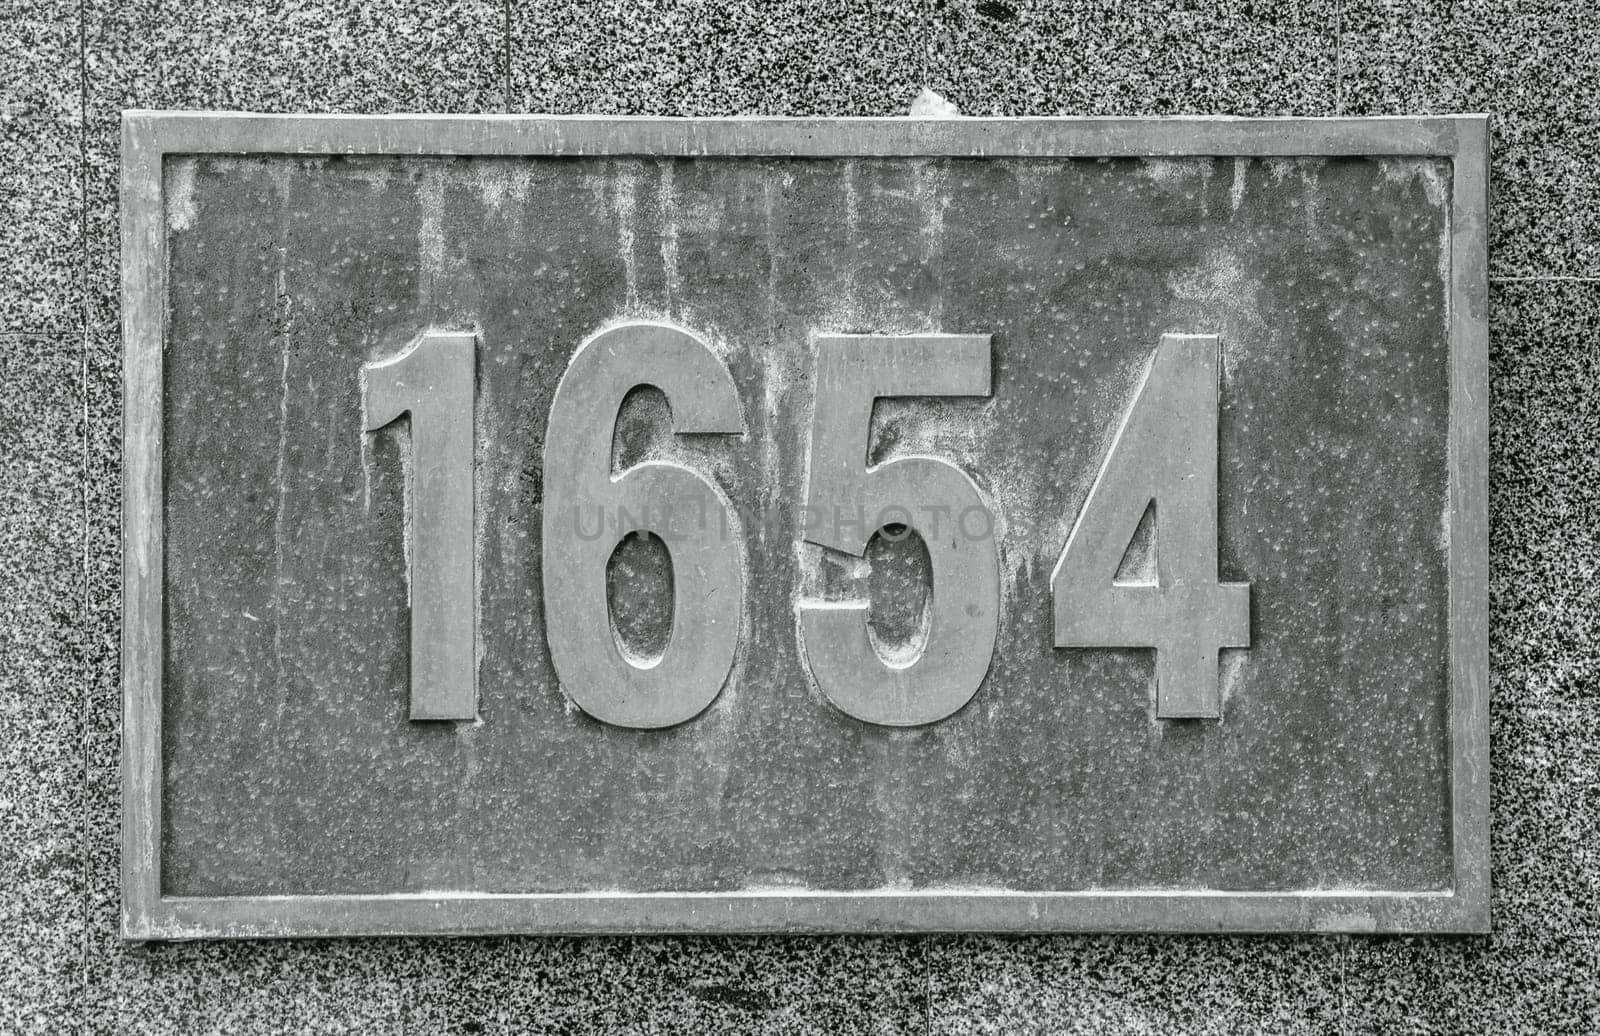 Cast bronze house number on stone wall concept photo. Street exterior metal board plate on wall. A plaque on a brick wall. Street scene, public park. High quality picture.